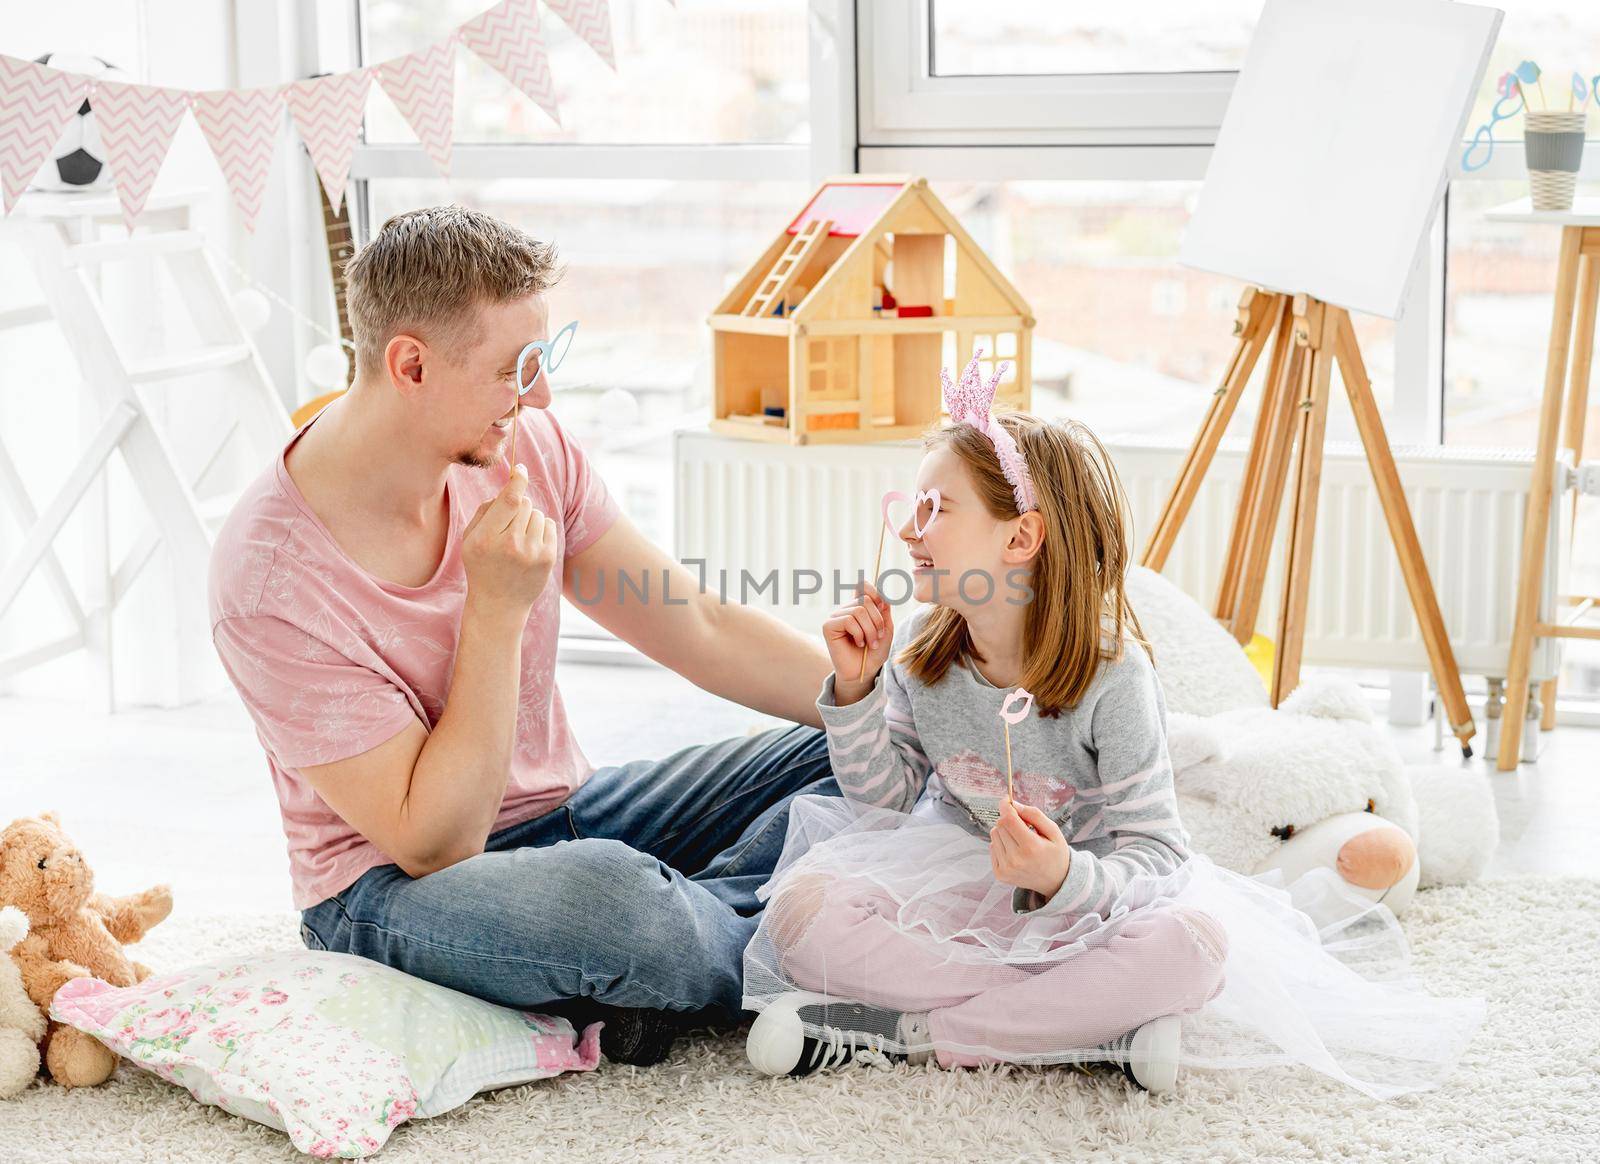 Smiling man and happy girl fooling with glasses on stick indoors